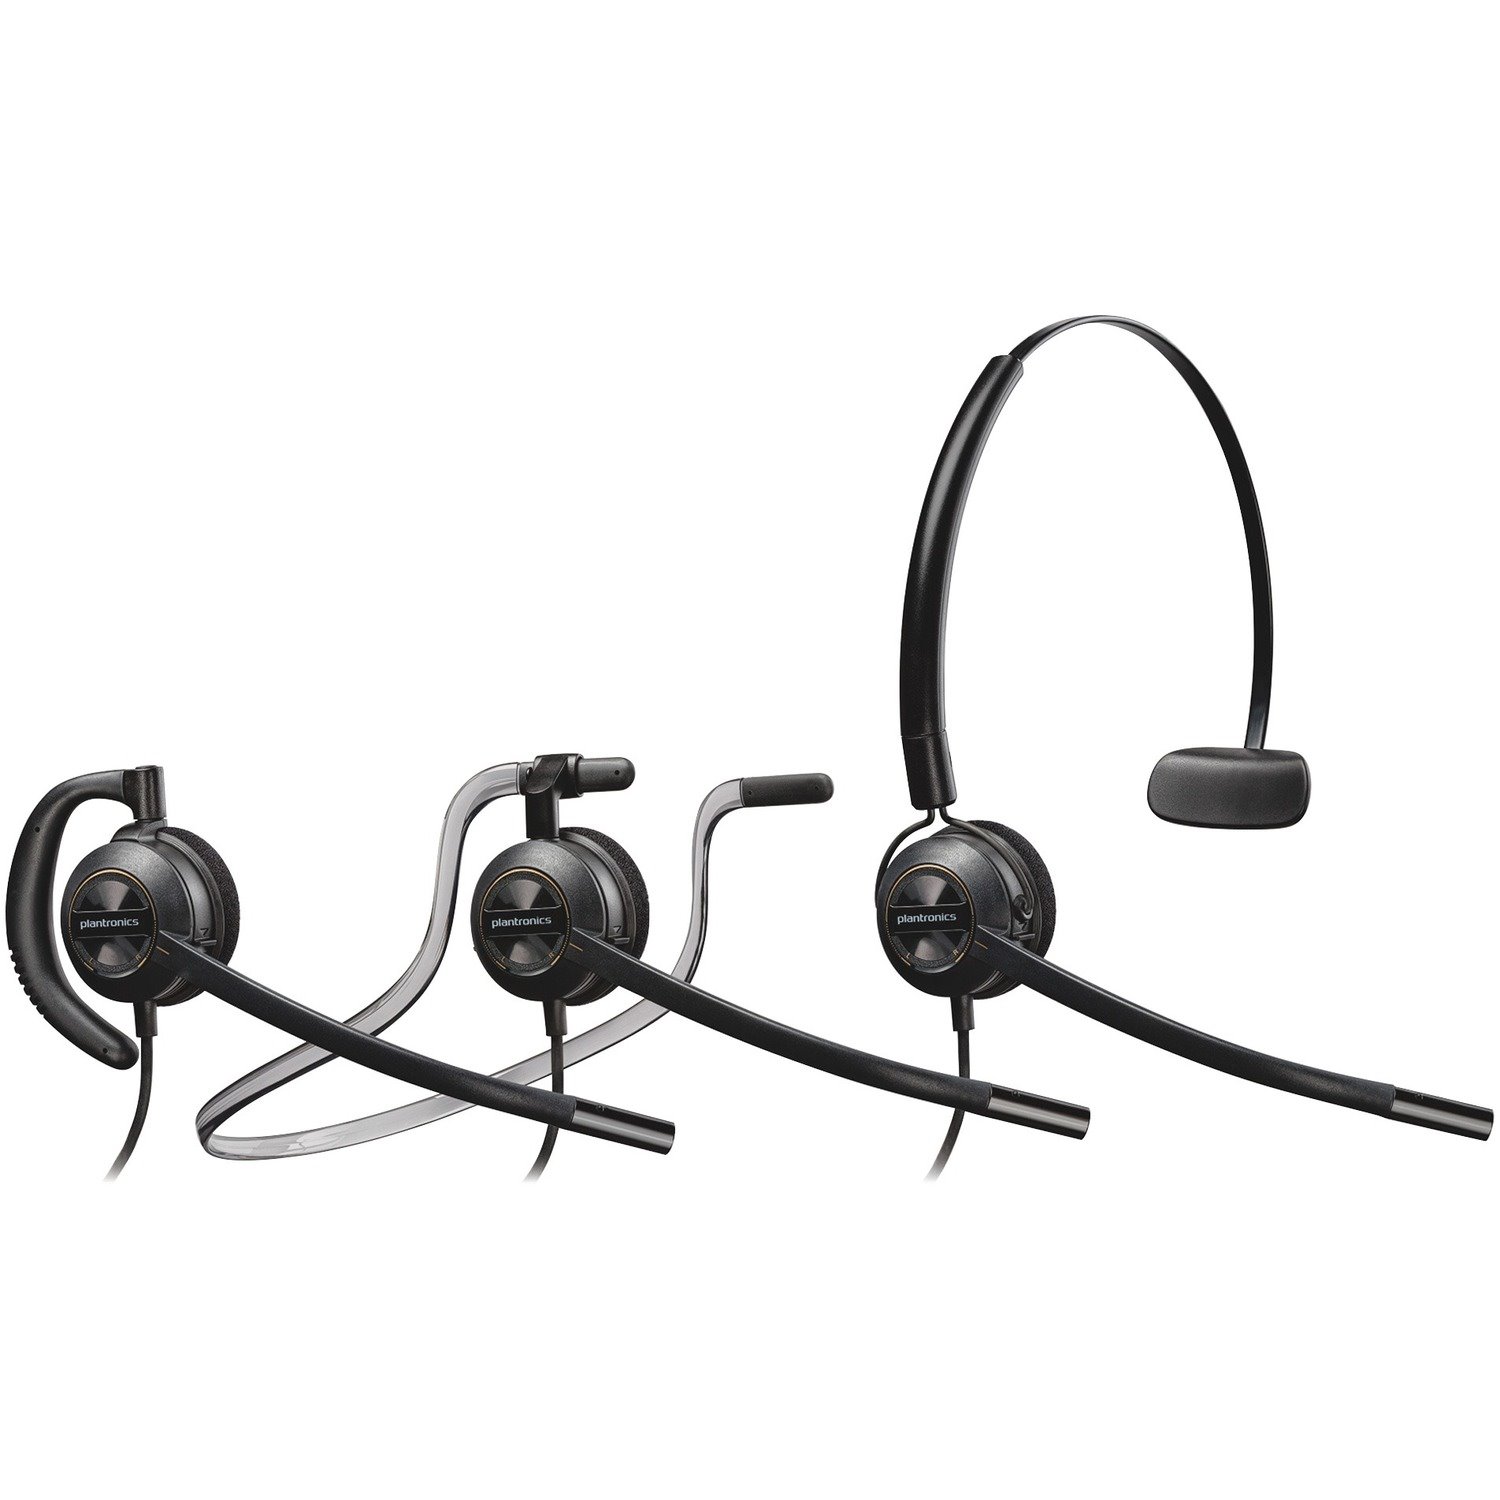 Plantronics EncorePro HW540 Wired Over-the-head, Behind-the-neck, Over-the-ear Mono Headset